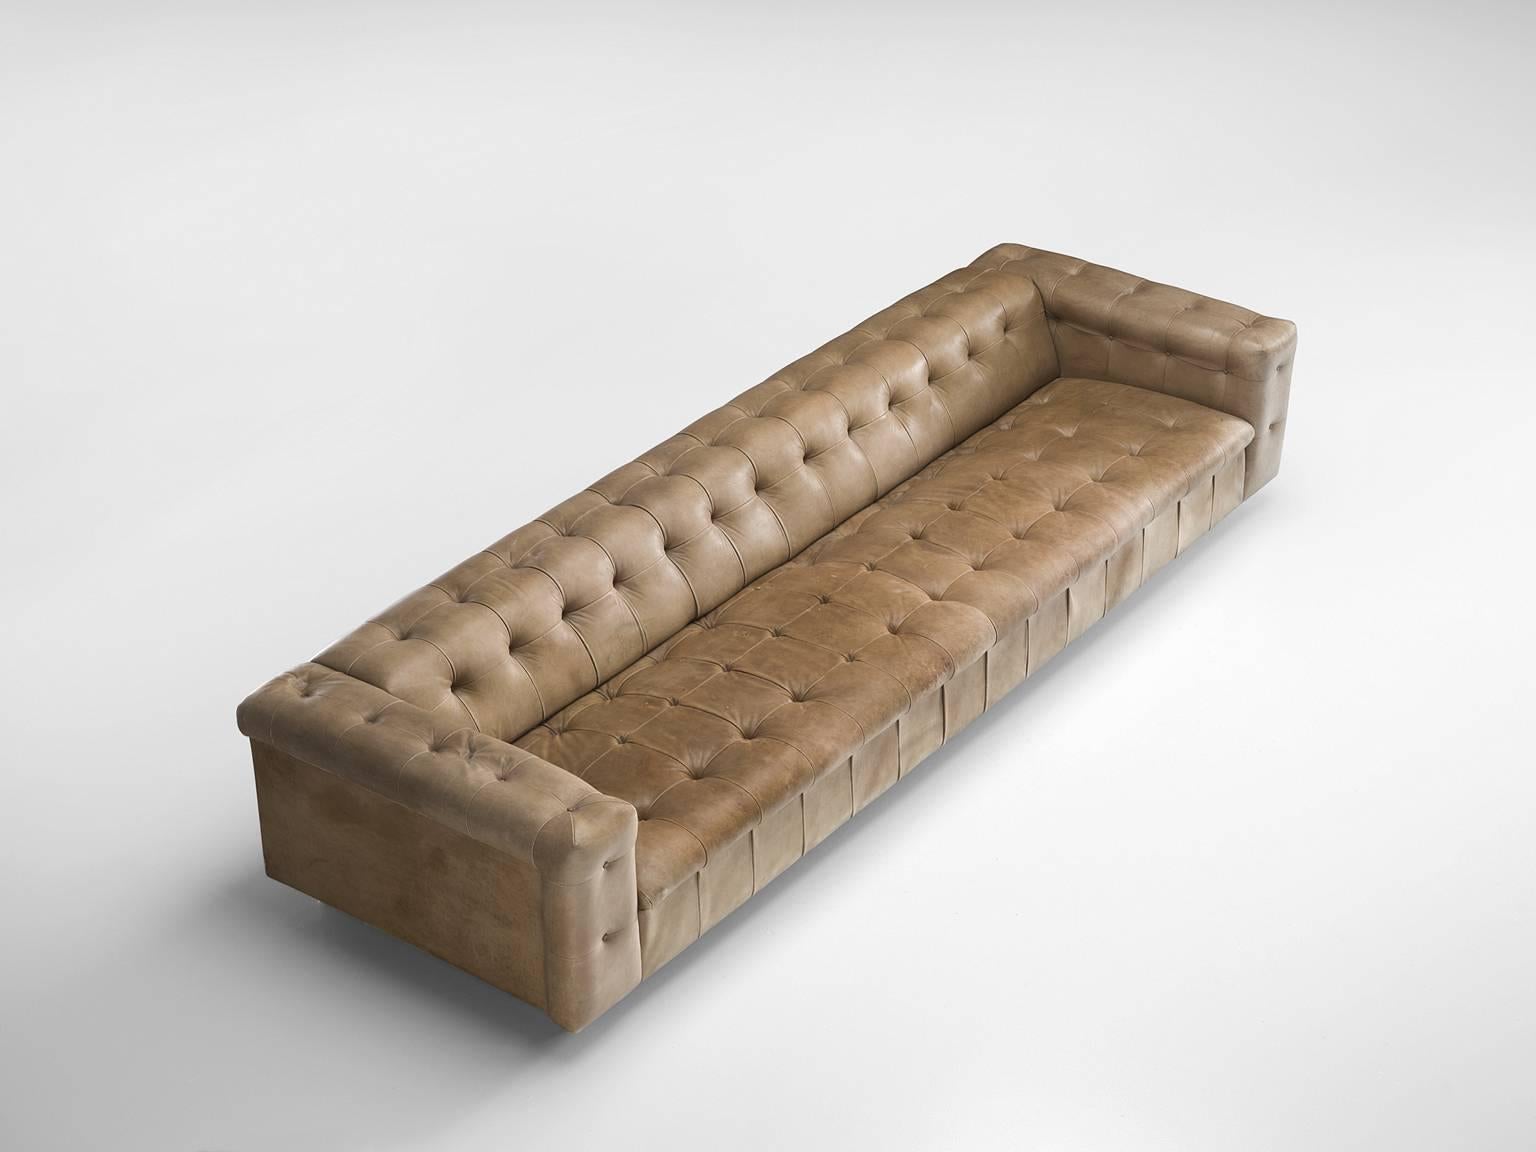 Sofa, 'RH-306', cognac to caramel leather, by Robert Haussmann for De Sede, Europe, 1960s. Measure: 3.60m.

This grand sofa is both grand in its dimensions yet also in its use of material. The leather that is used on this sofa is of a very high